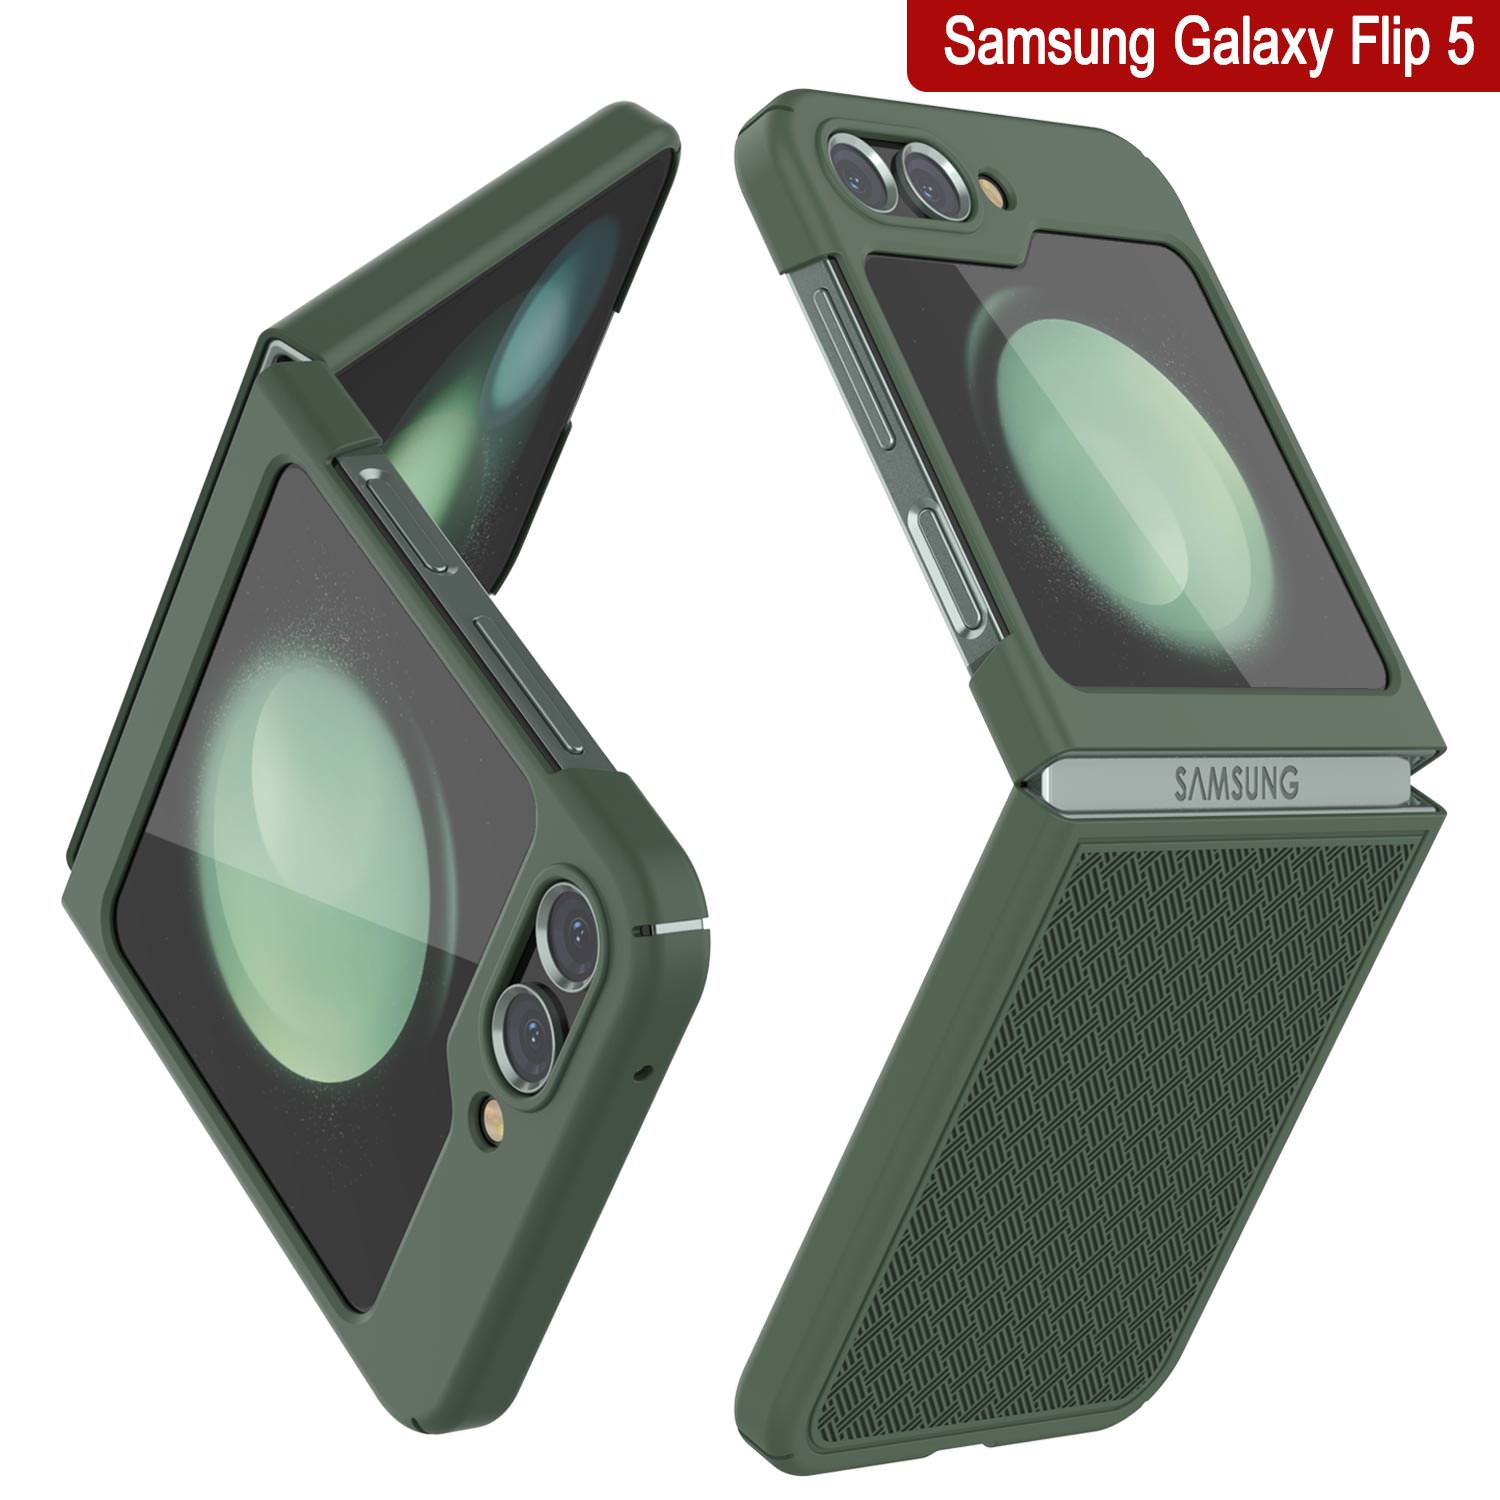 Galaxy Z Flip5 Case With Tempered Glass Screen Protector, Holster Belt Clip & Built-In Kickstand [Green]